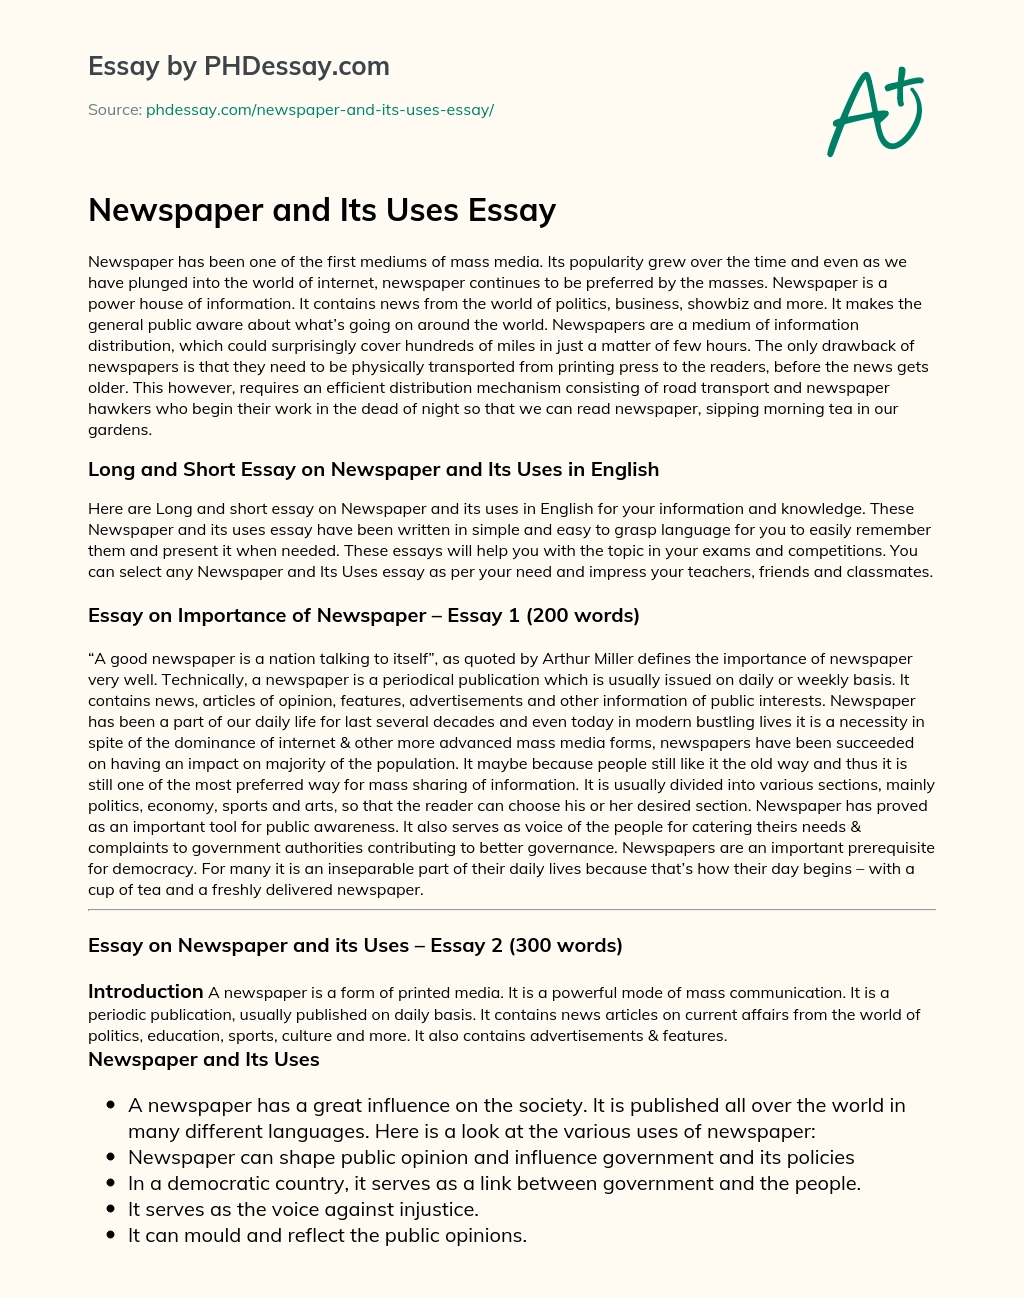 an essay on uses of newspaper